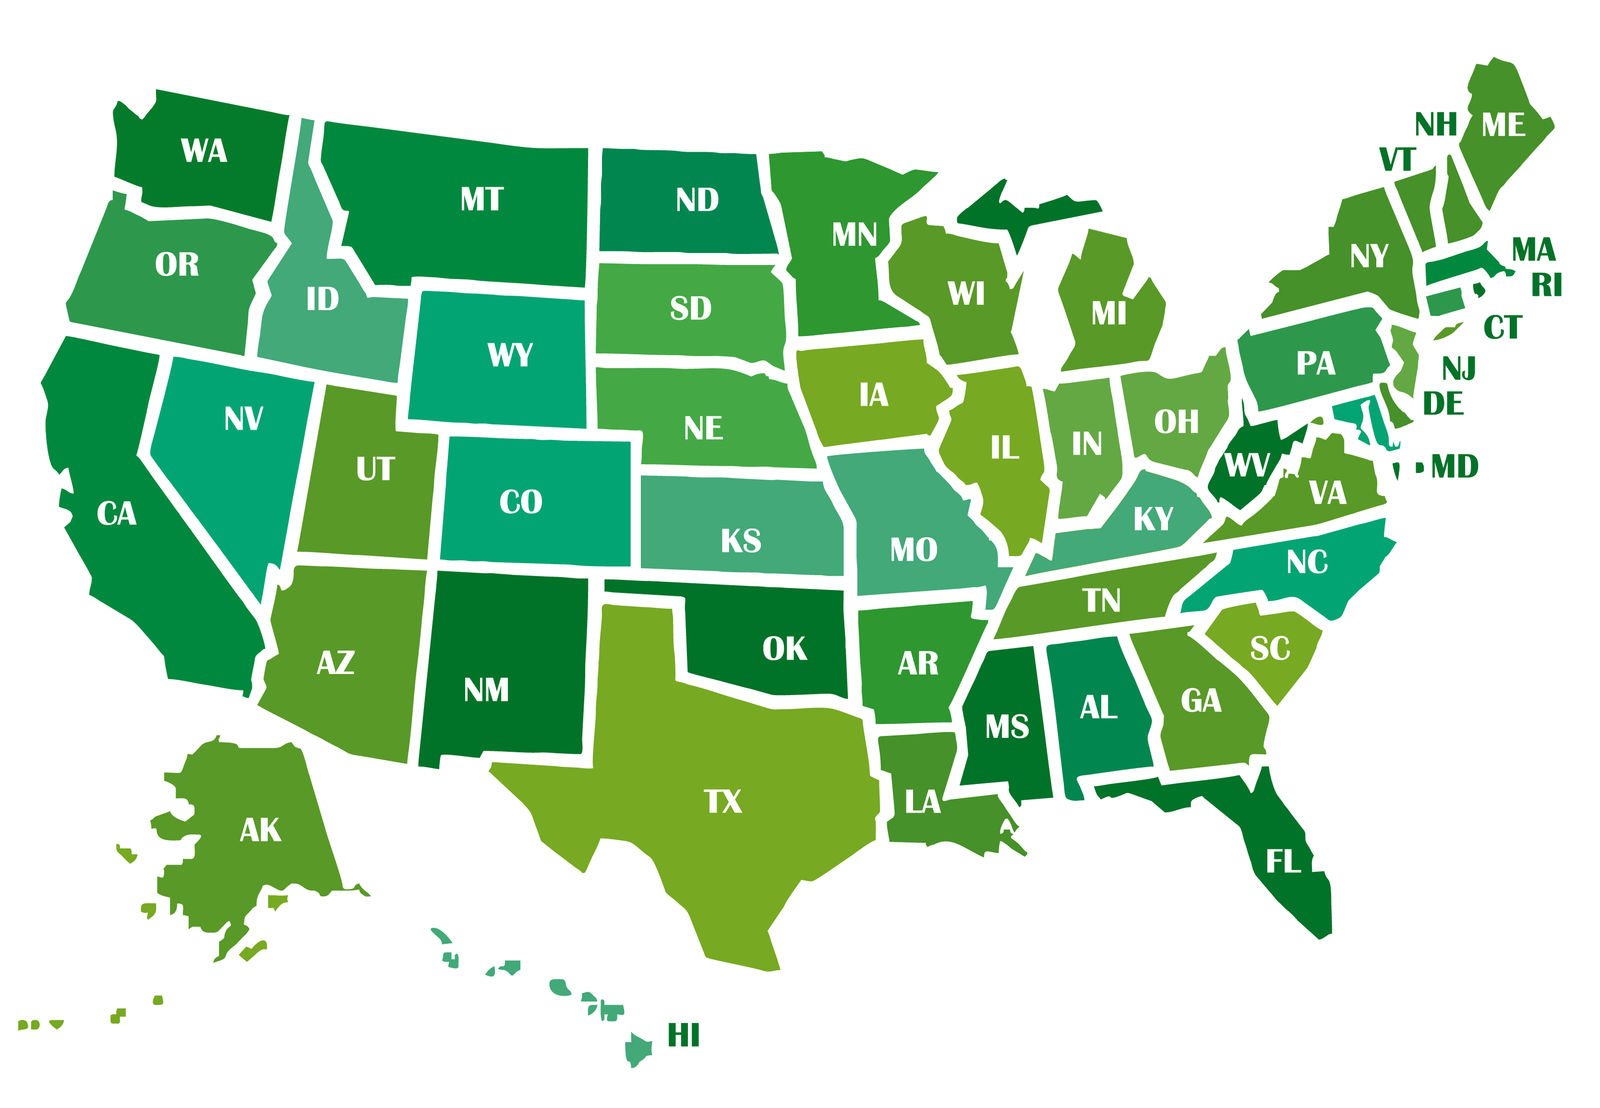 Auto Insurance Requirements By State | Do you have to have auto insurance in every state?